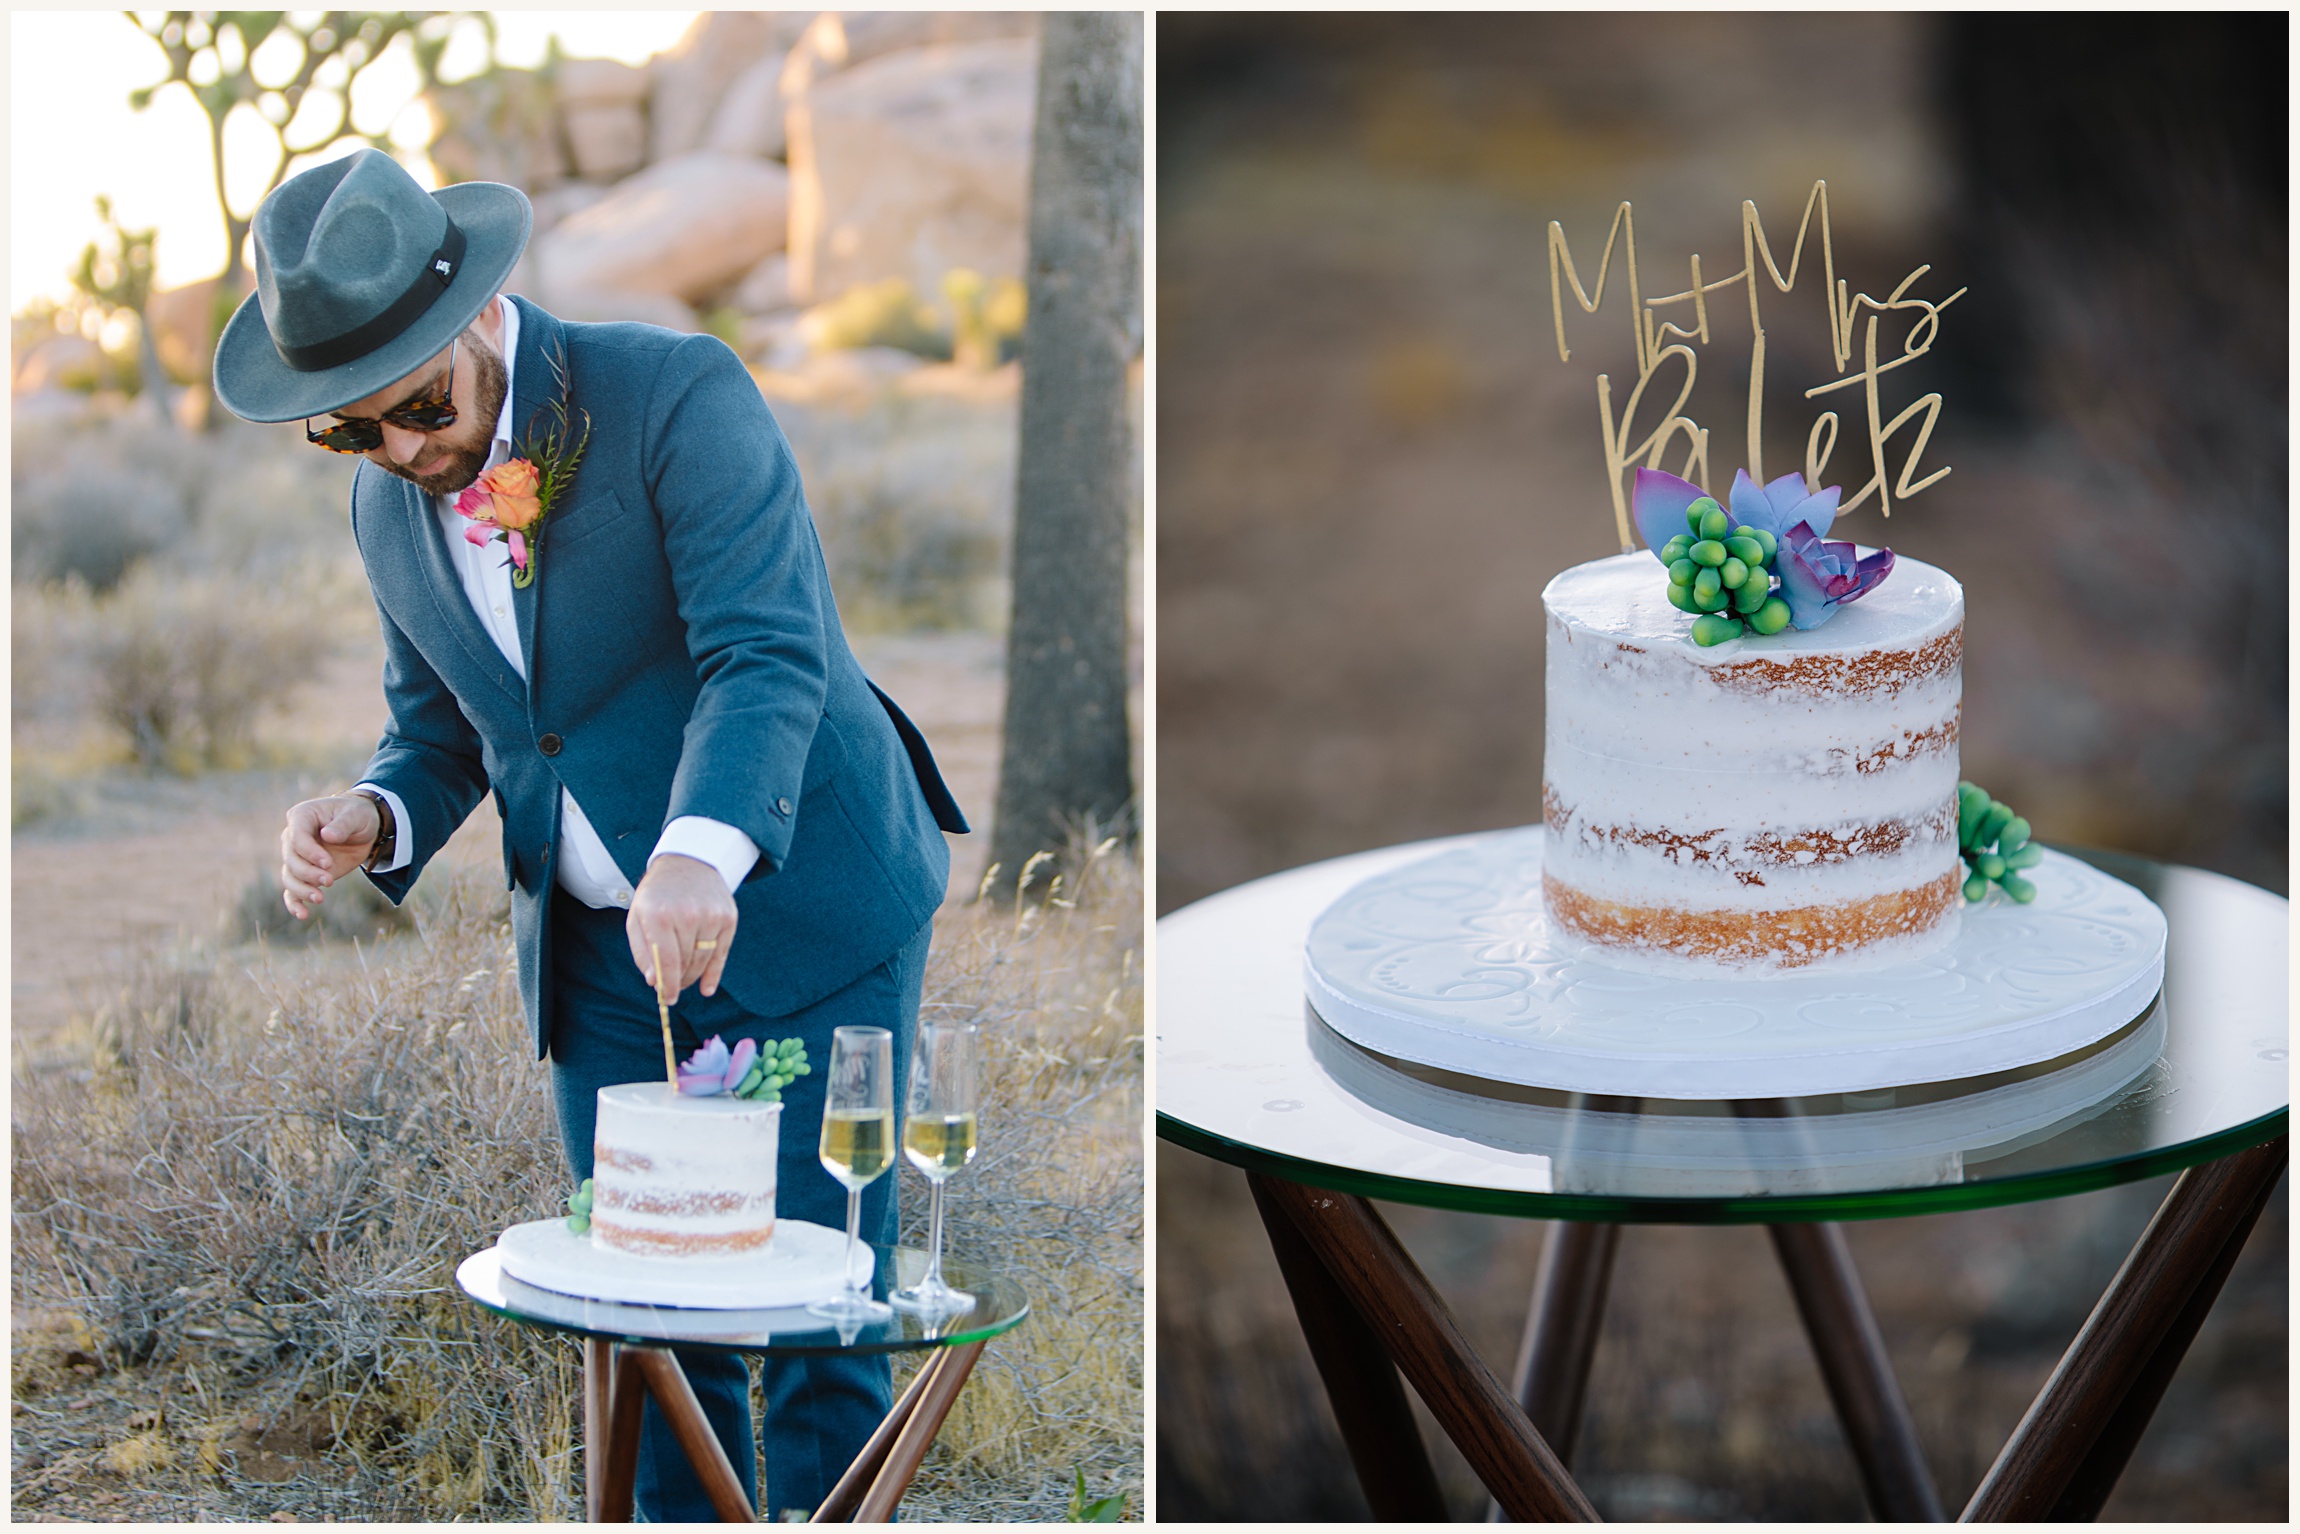 Photo of Elopement Cake with Mr and Mrs Cake topper